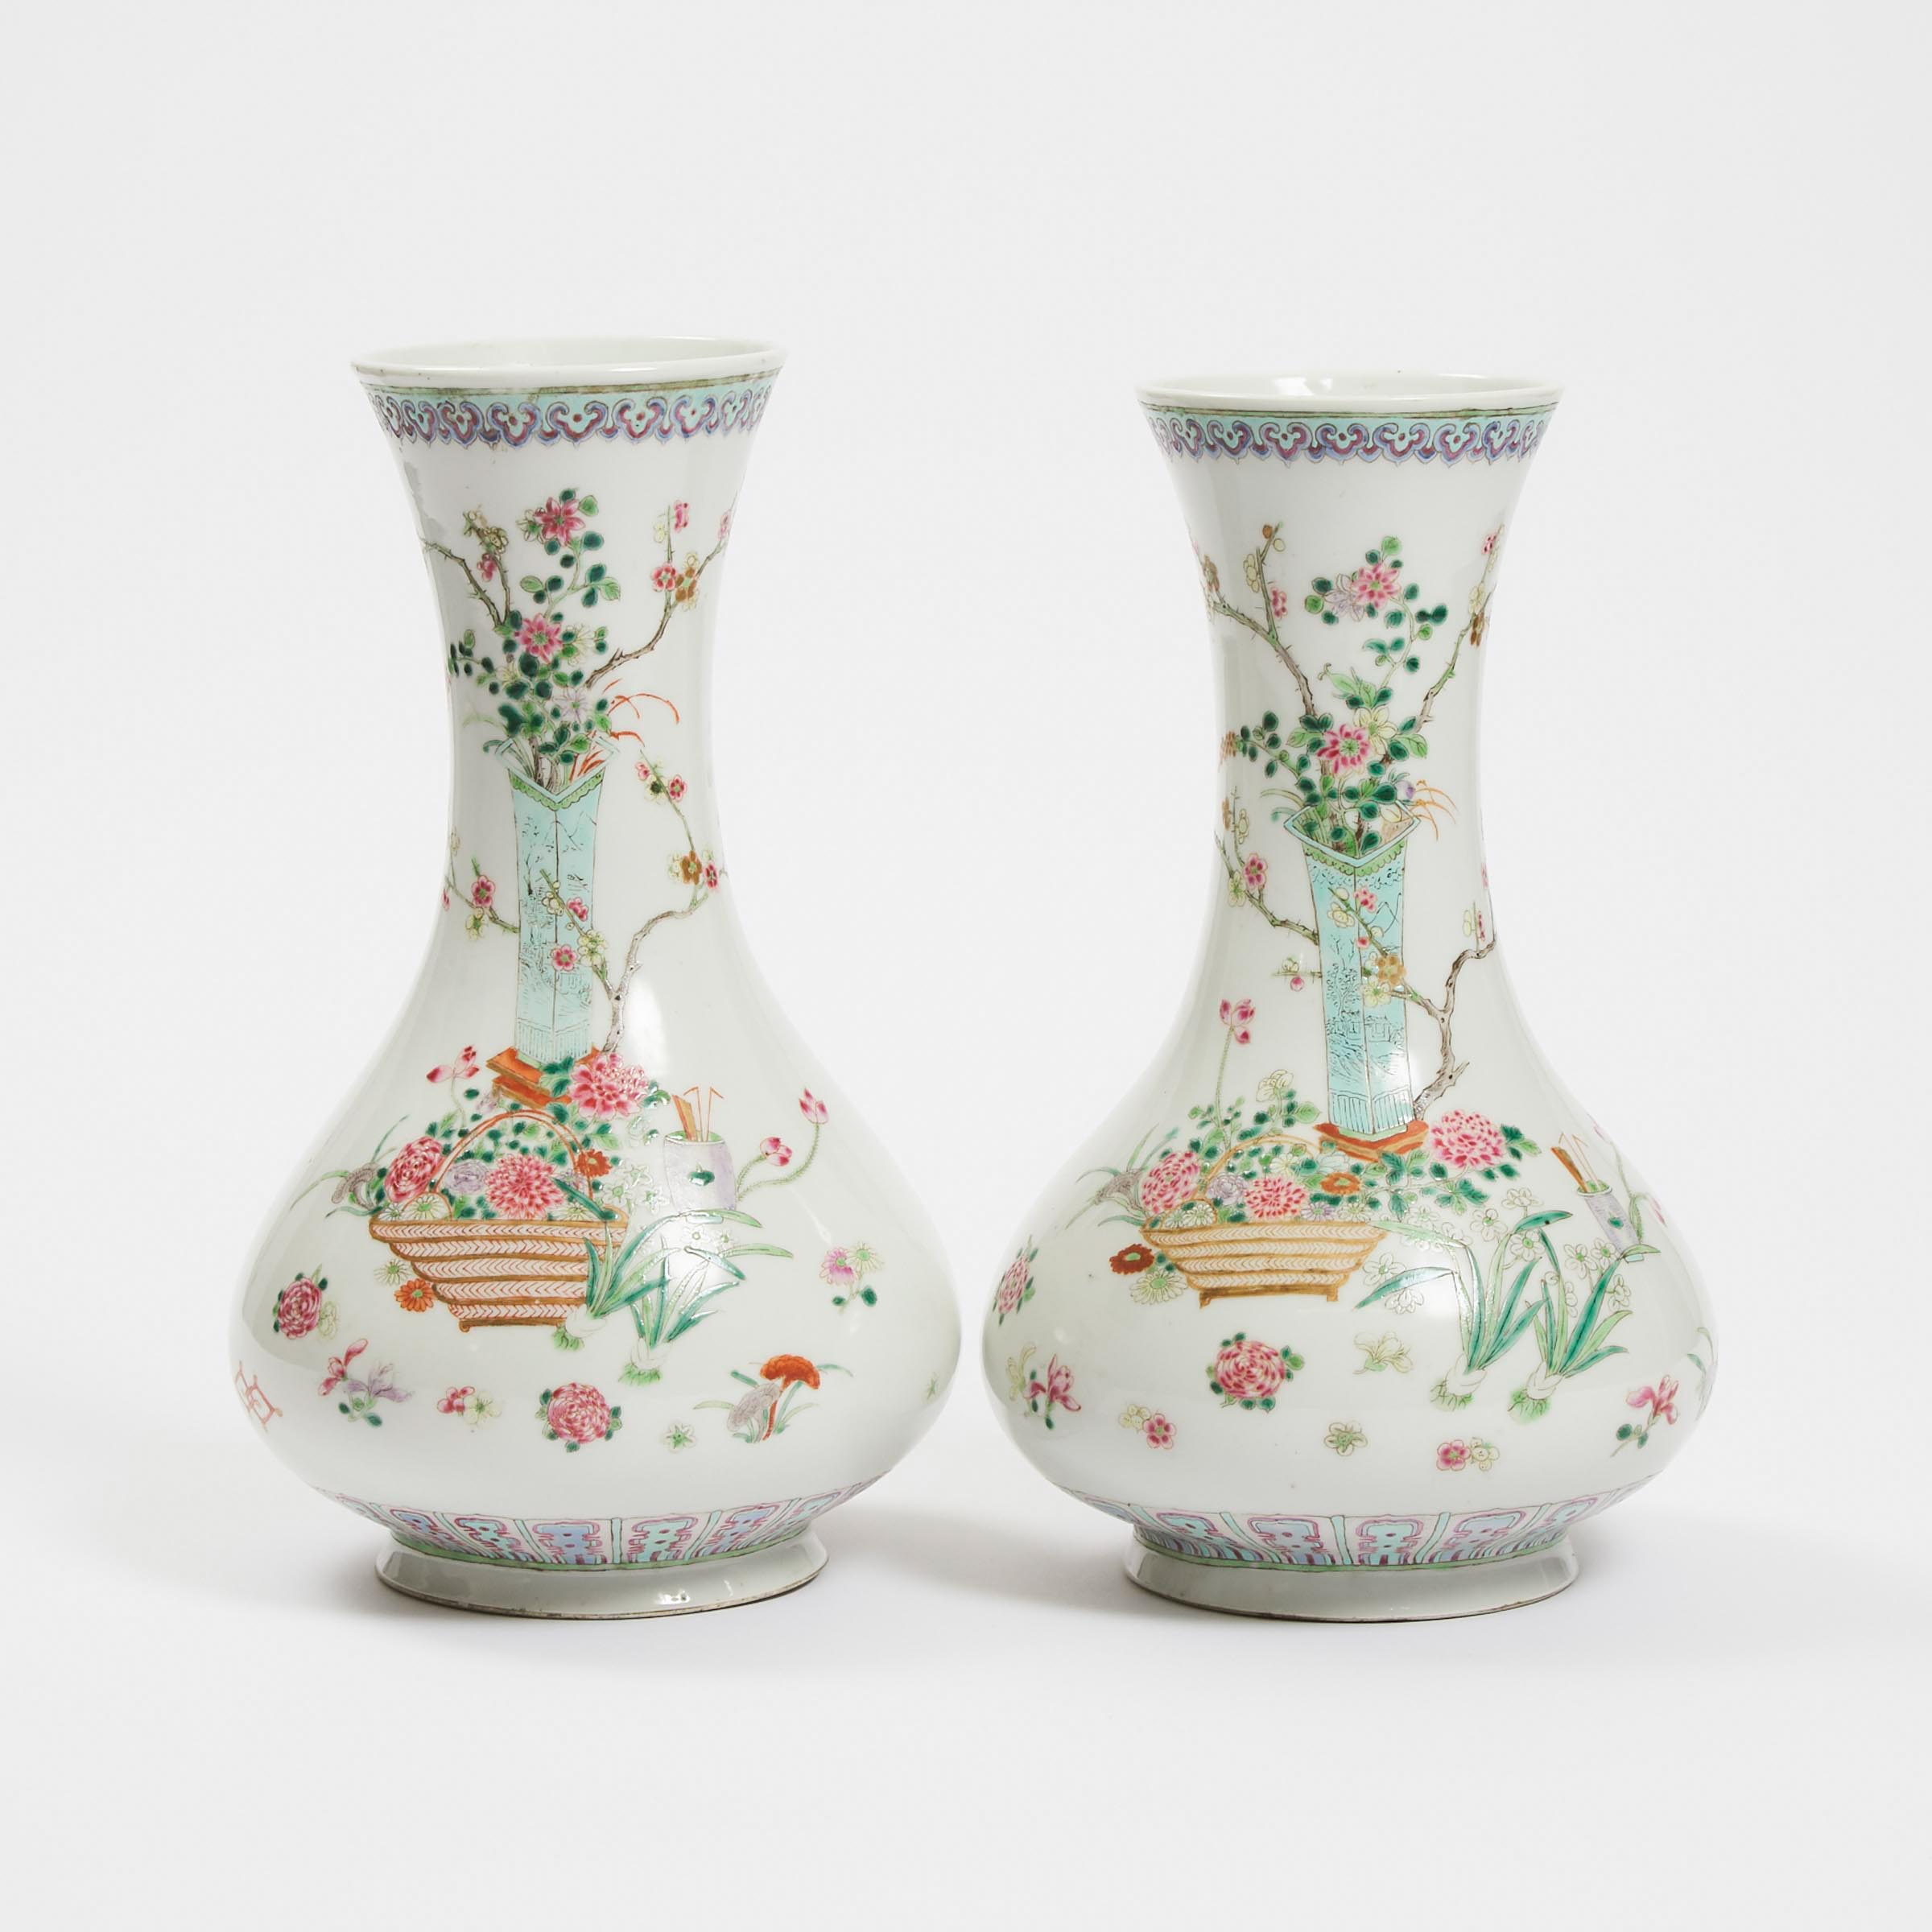 A Pair of Famille Rose Pear-Shaped Vases, Qianlong Mark, Republican Period